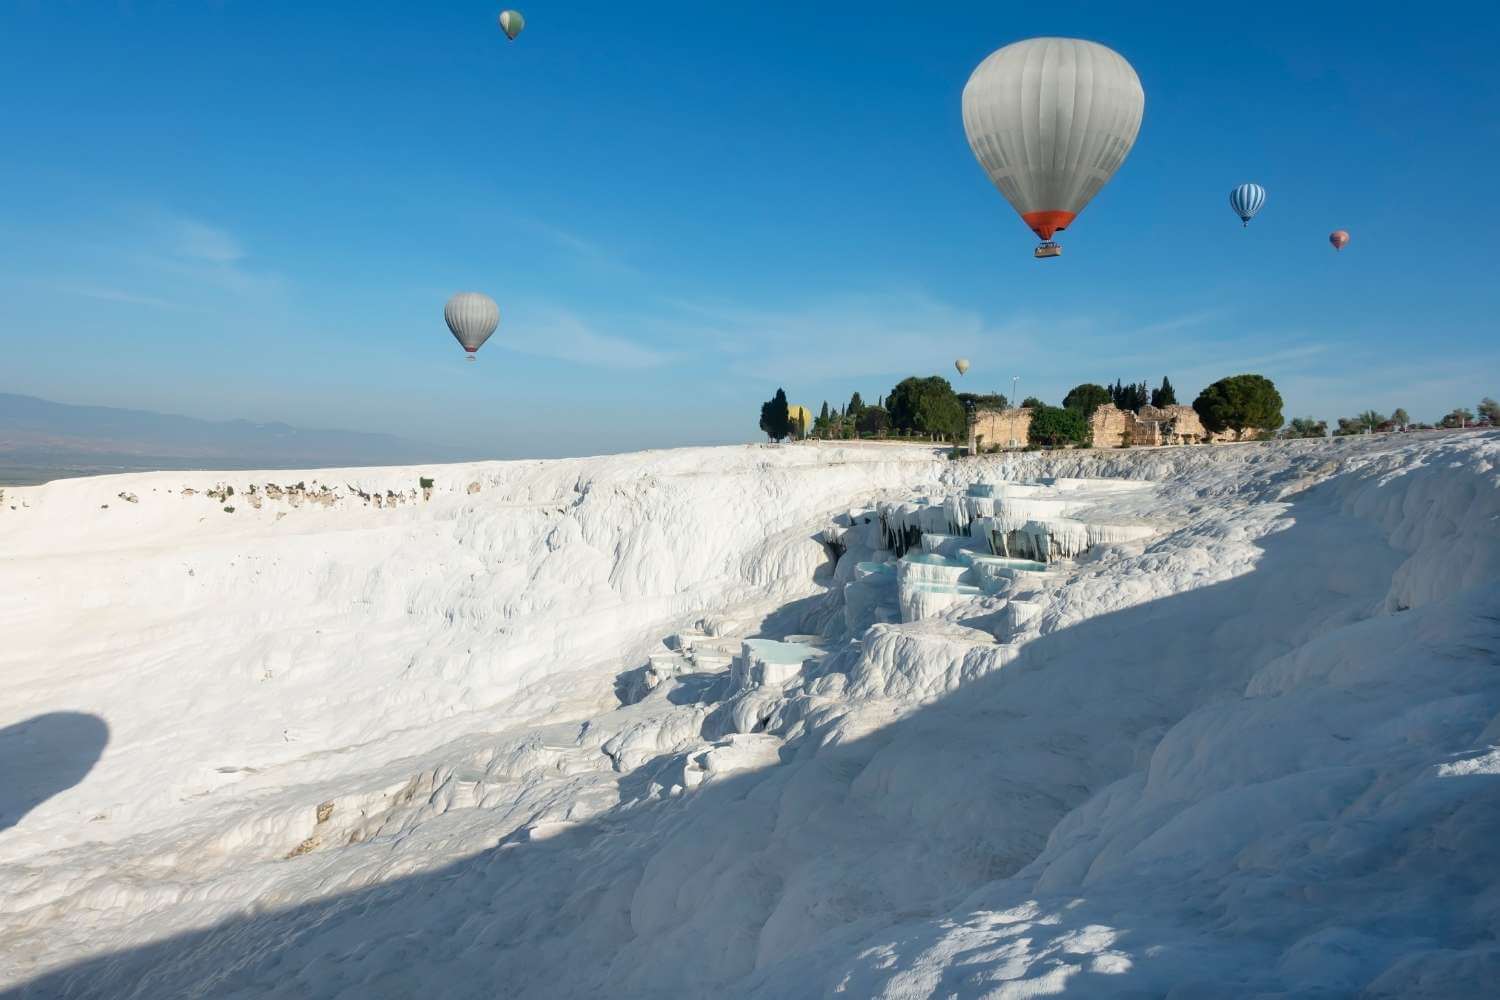 Pamukkale is one of the most exquisite displays of the beauty of nature that you can imagine. White travertine terraces of bright blue water and snow-white limestone decorate the valley sides of Pamukkale, known as the ‘Cotton Castle’. These unique natural formations make a trip to Pamukkale an unmissable highlight of any tour of Turkey. These natural pools were formed as a result of centuries of limestone erosion by thermal springs, and the mineral-rich water of Pamukkale’s pools have long-since attracted visitors thanks to their reputedly therapeutic properties. Hierapolis, the ancient city built around Pamukkale’s natural pools, pays testament to this, as it was constructed around the 2nd-century BC as a spa town to make the most of the warm, mineral-rich waters of this region.